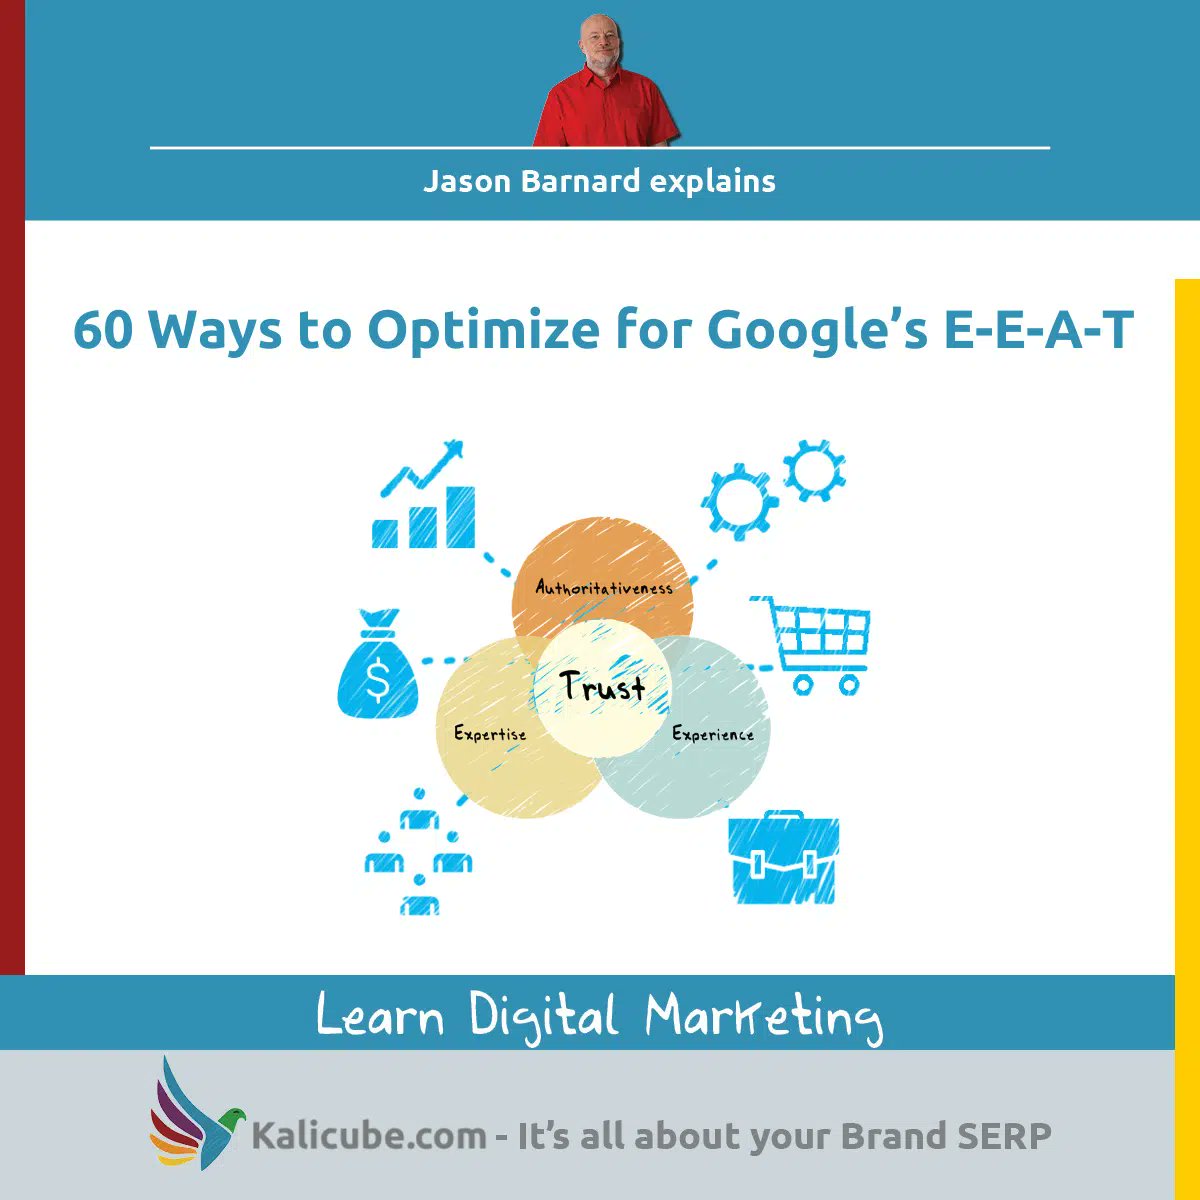 Are you having trouble improving your website for #Google's E-A-T?

Here’s an awesome read from @jasonmbarnard about the 60 simple tips & strategies you can implement to boost your E-E-A-T in #Googlealgorithms.

Read now!
kalicube.com/learning-space…

#SEO #EEAT #Google #KalicubePro